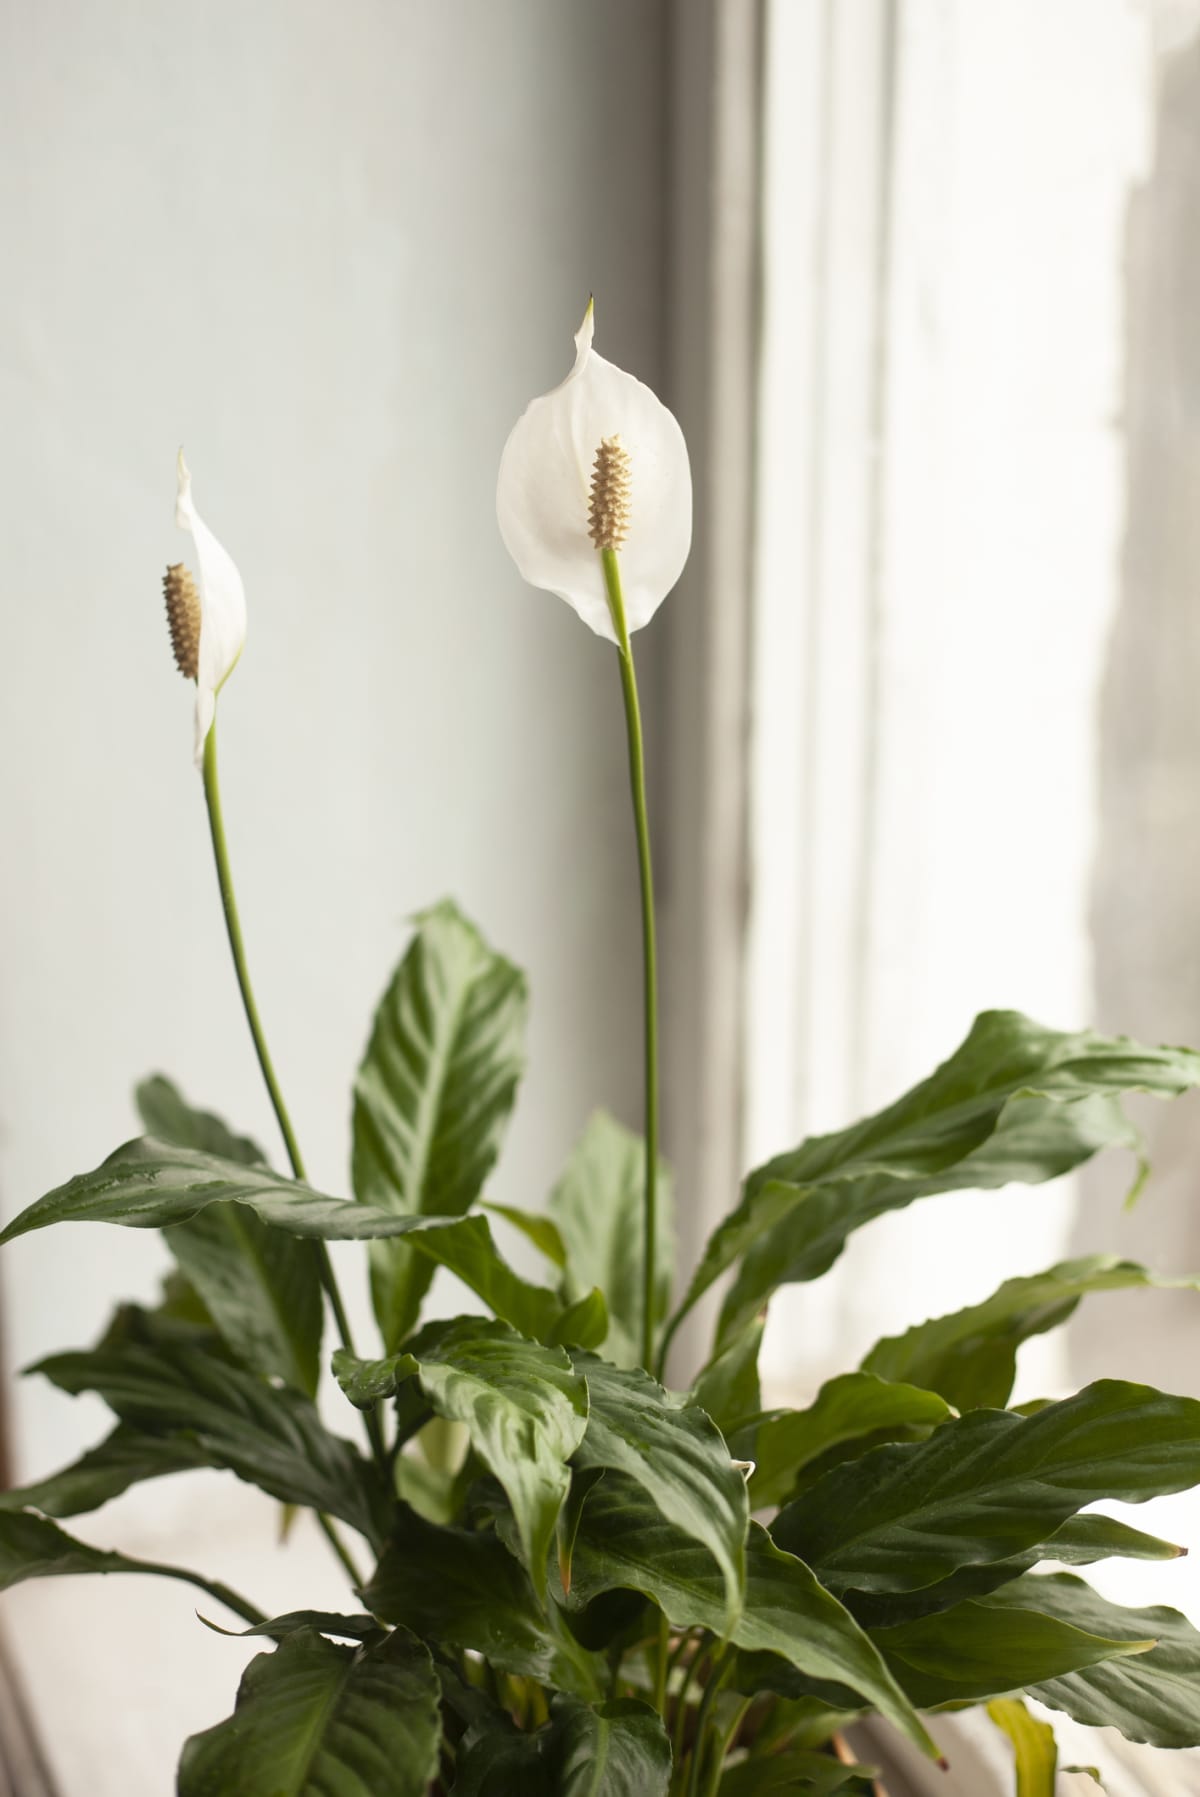 Peace lily growing by the window